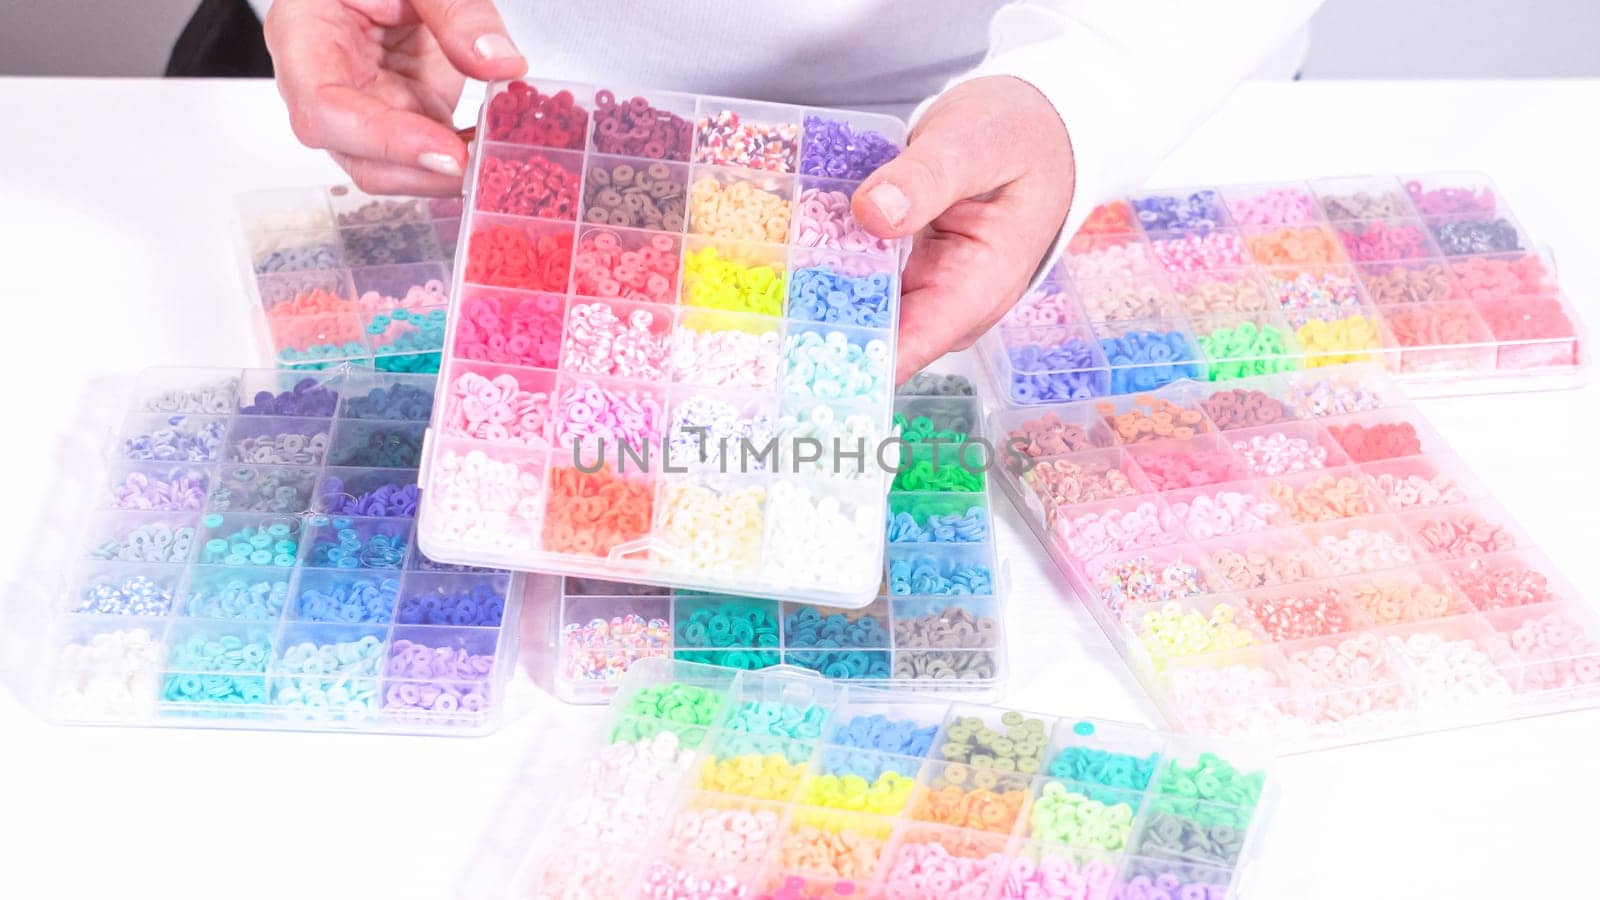 Woman hands gracefully poised over a collection of beads, sorted by color in transparent organizers. The array of beads spans a vibrant spectrum, from deep purples to bright oranges, meticulously arranged for easy selection as she embarks on creating a custom piece of jewelry.